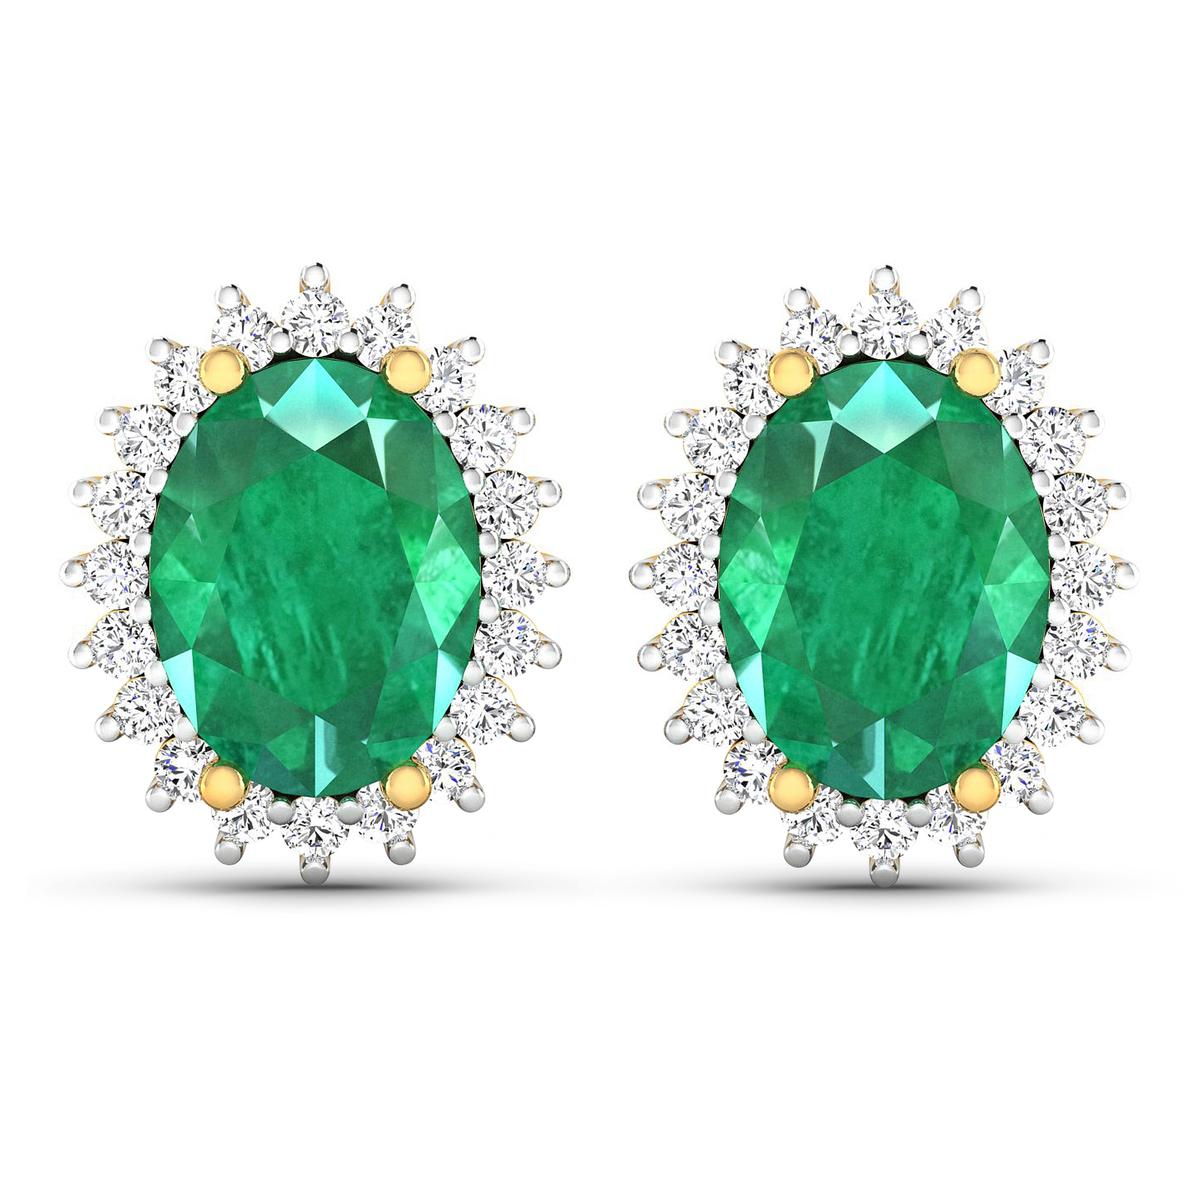 14KT Yellow Gold 2.00ctw Emerald and Diamond Earrings